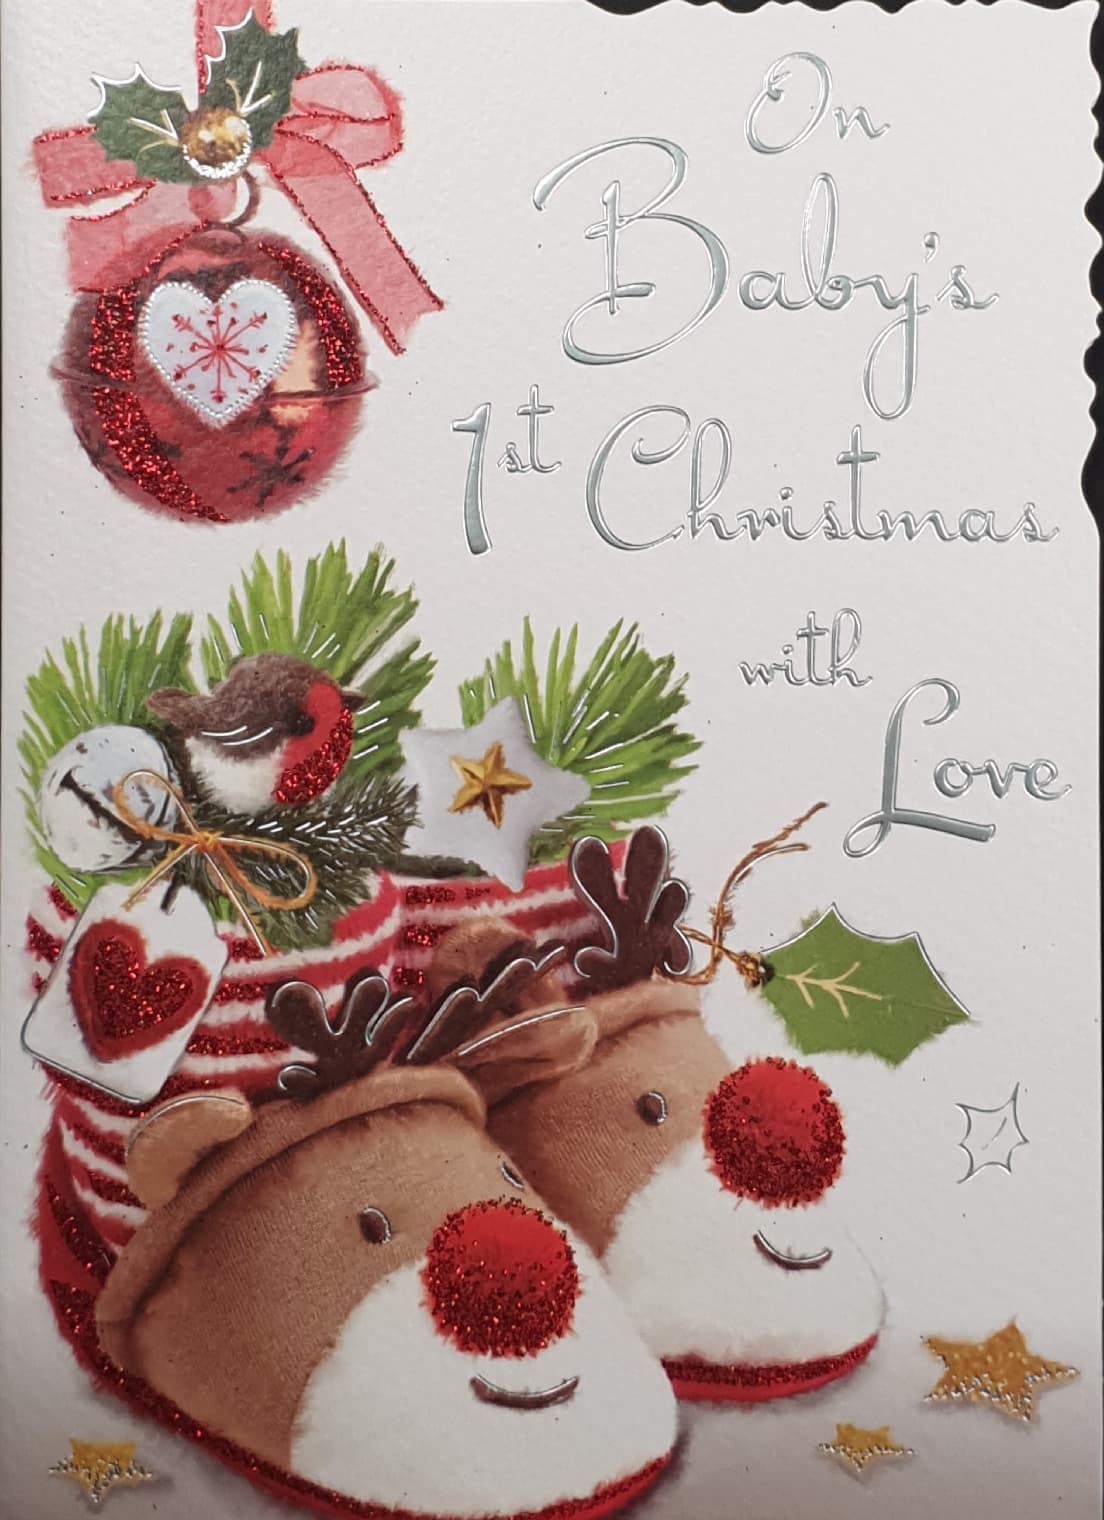 Baby's First Christmas Card - With Love / Happy Rudolph Slippers & Decorations